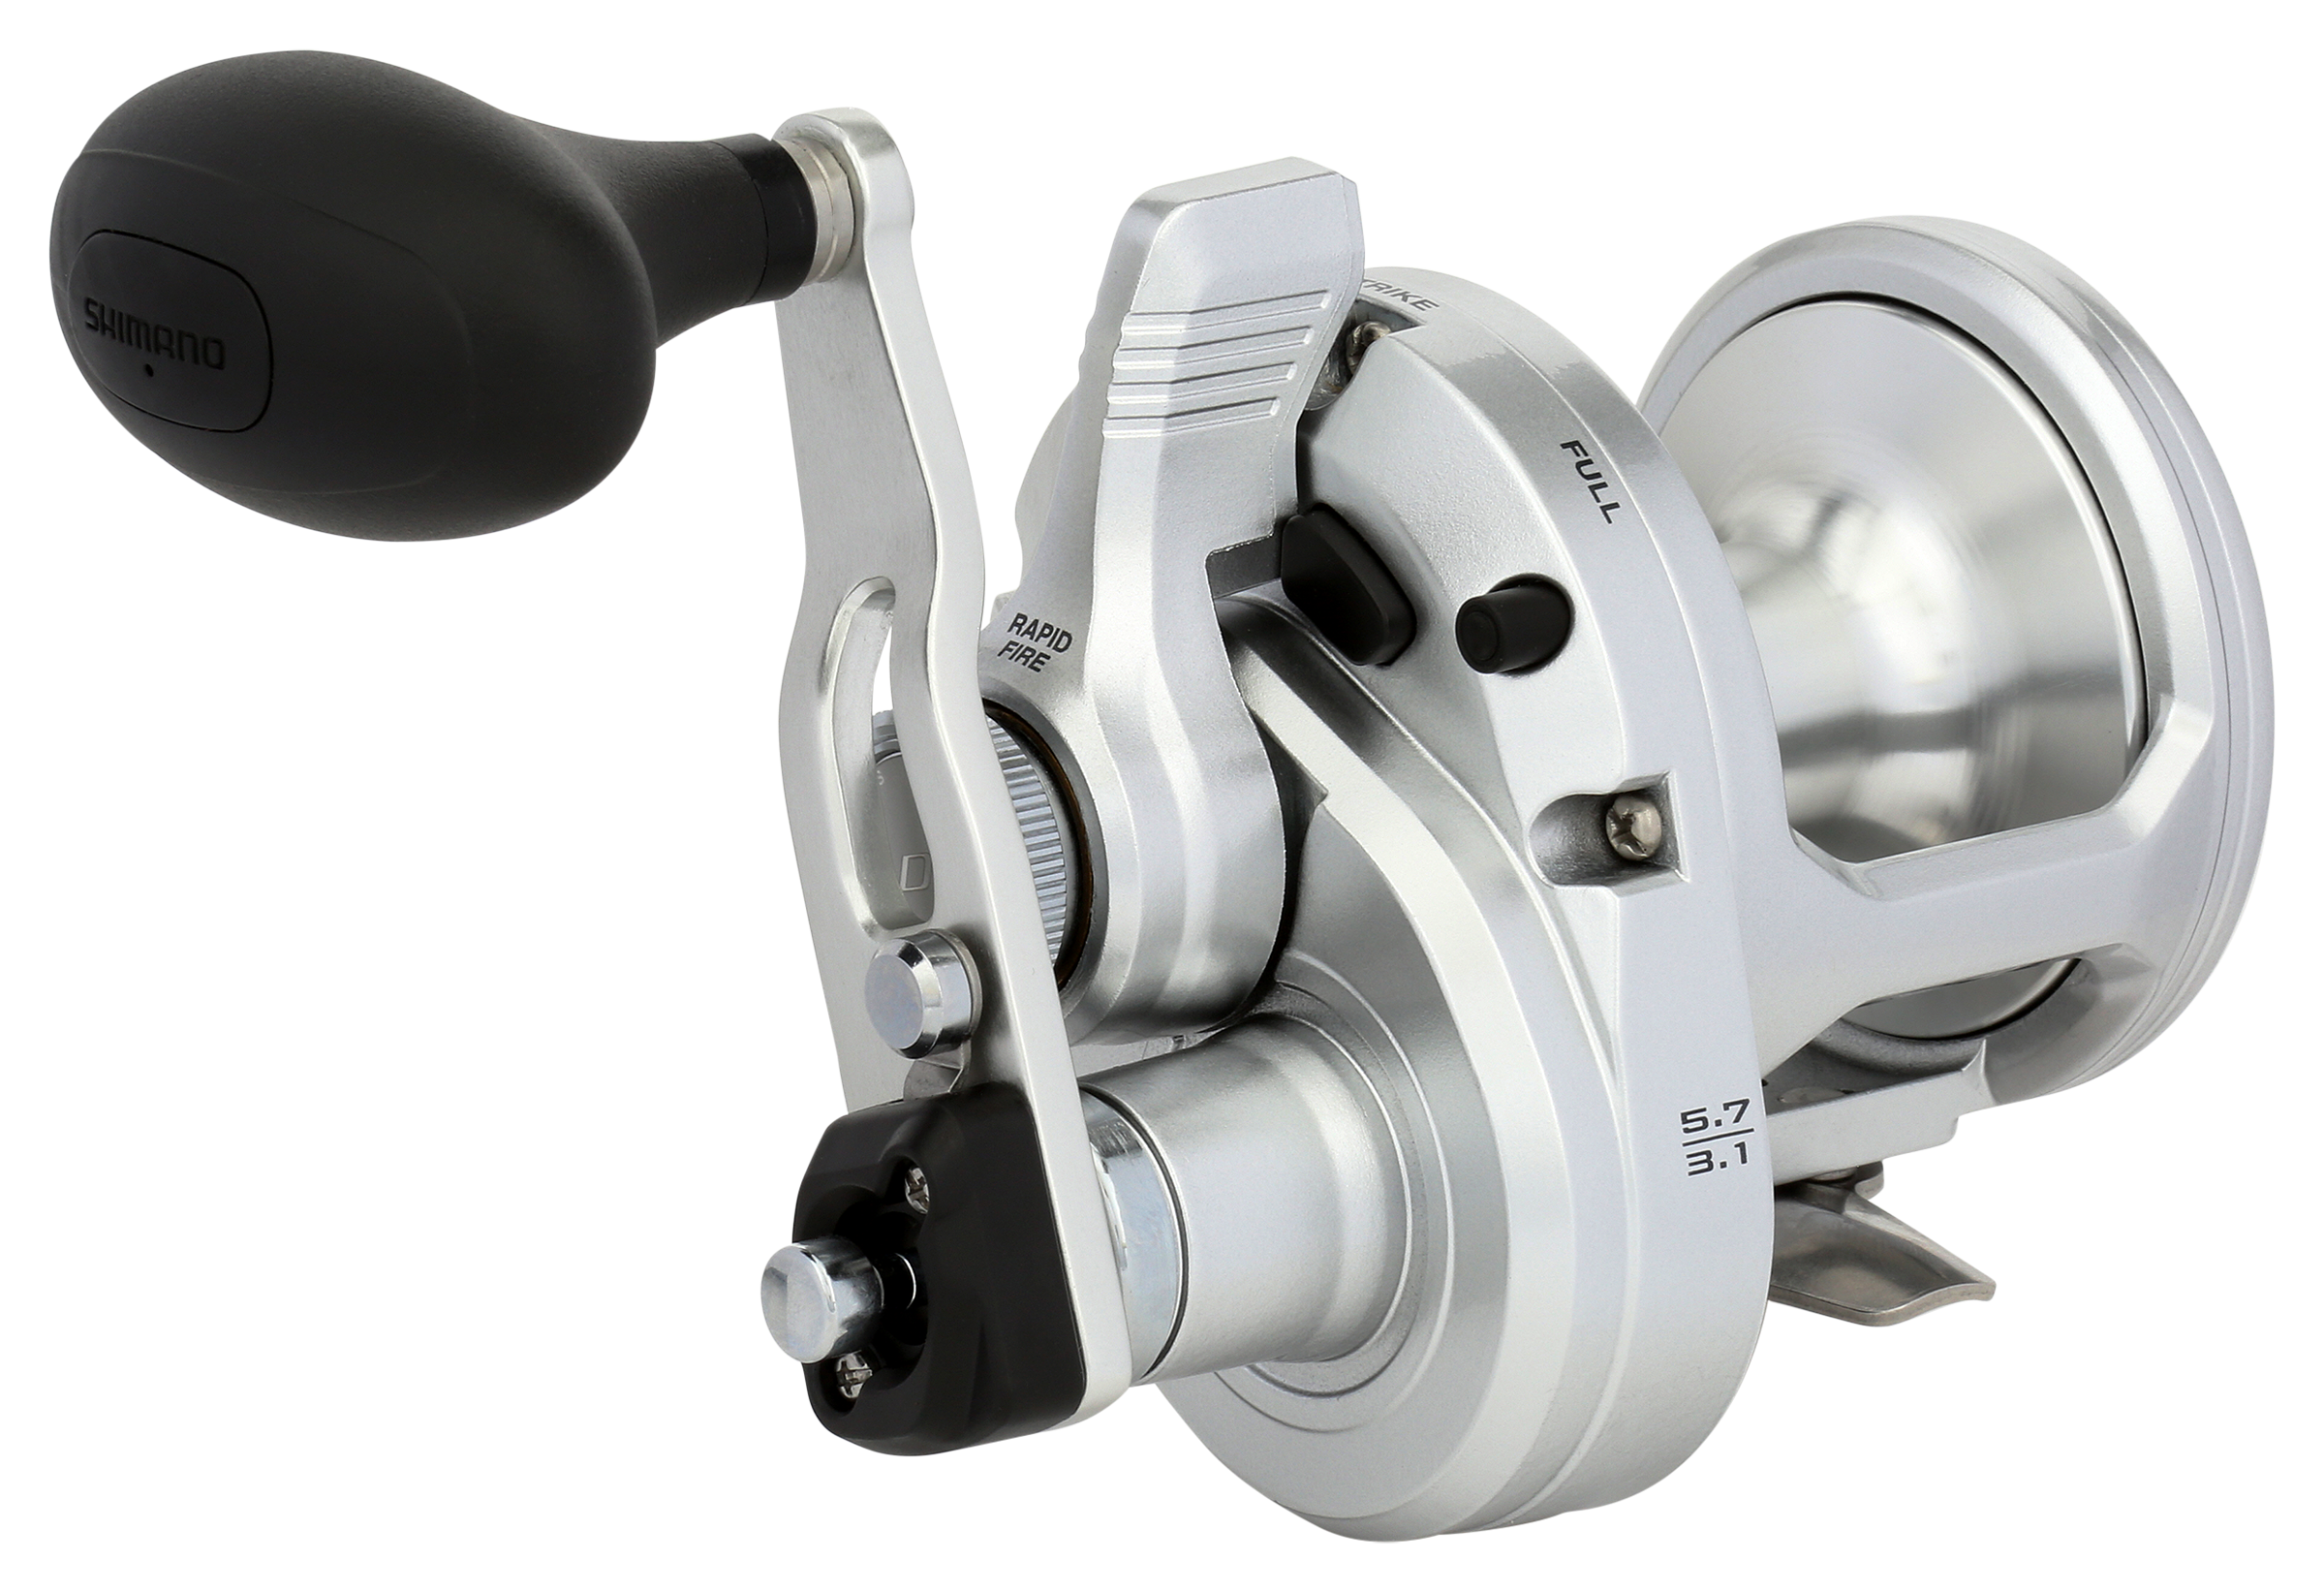 Honest of Review of the new Shimano Speed Master II